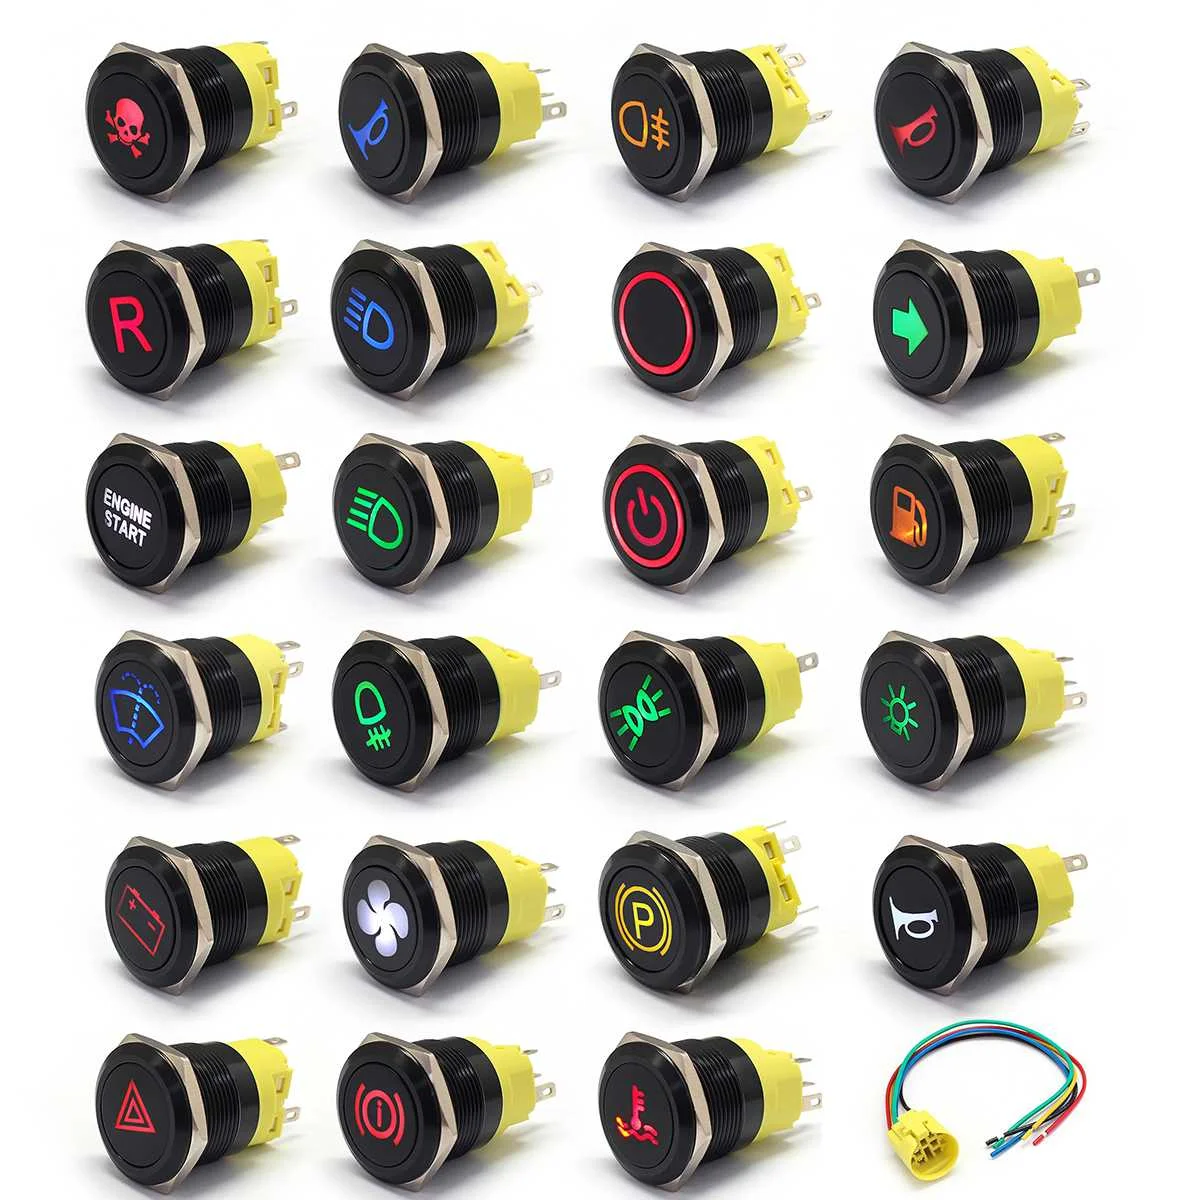 12v 22mm led push button start switch on//off boat engine auto